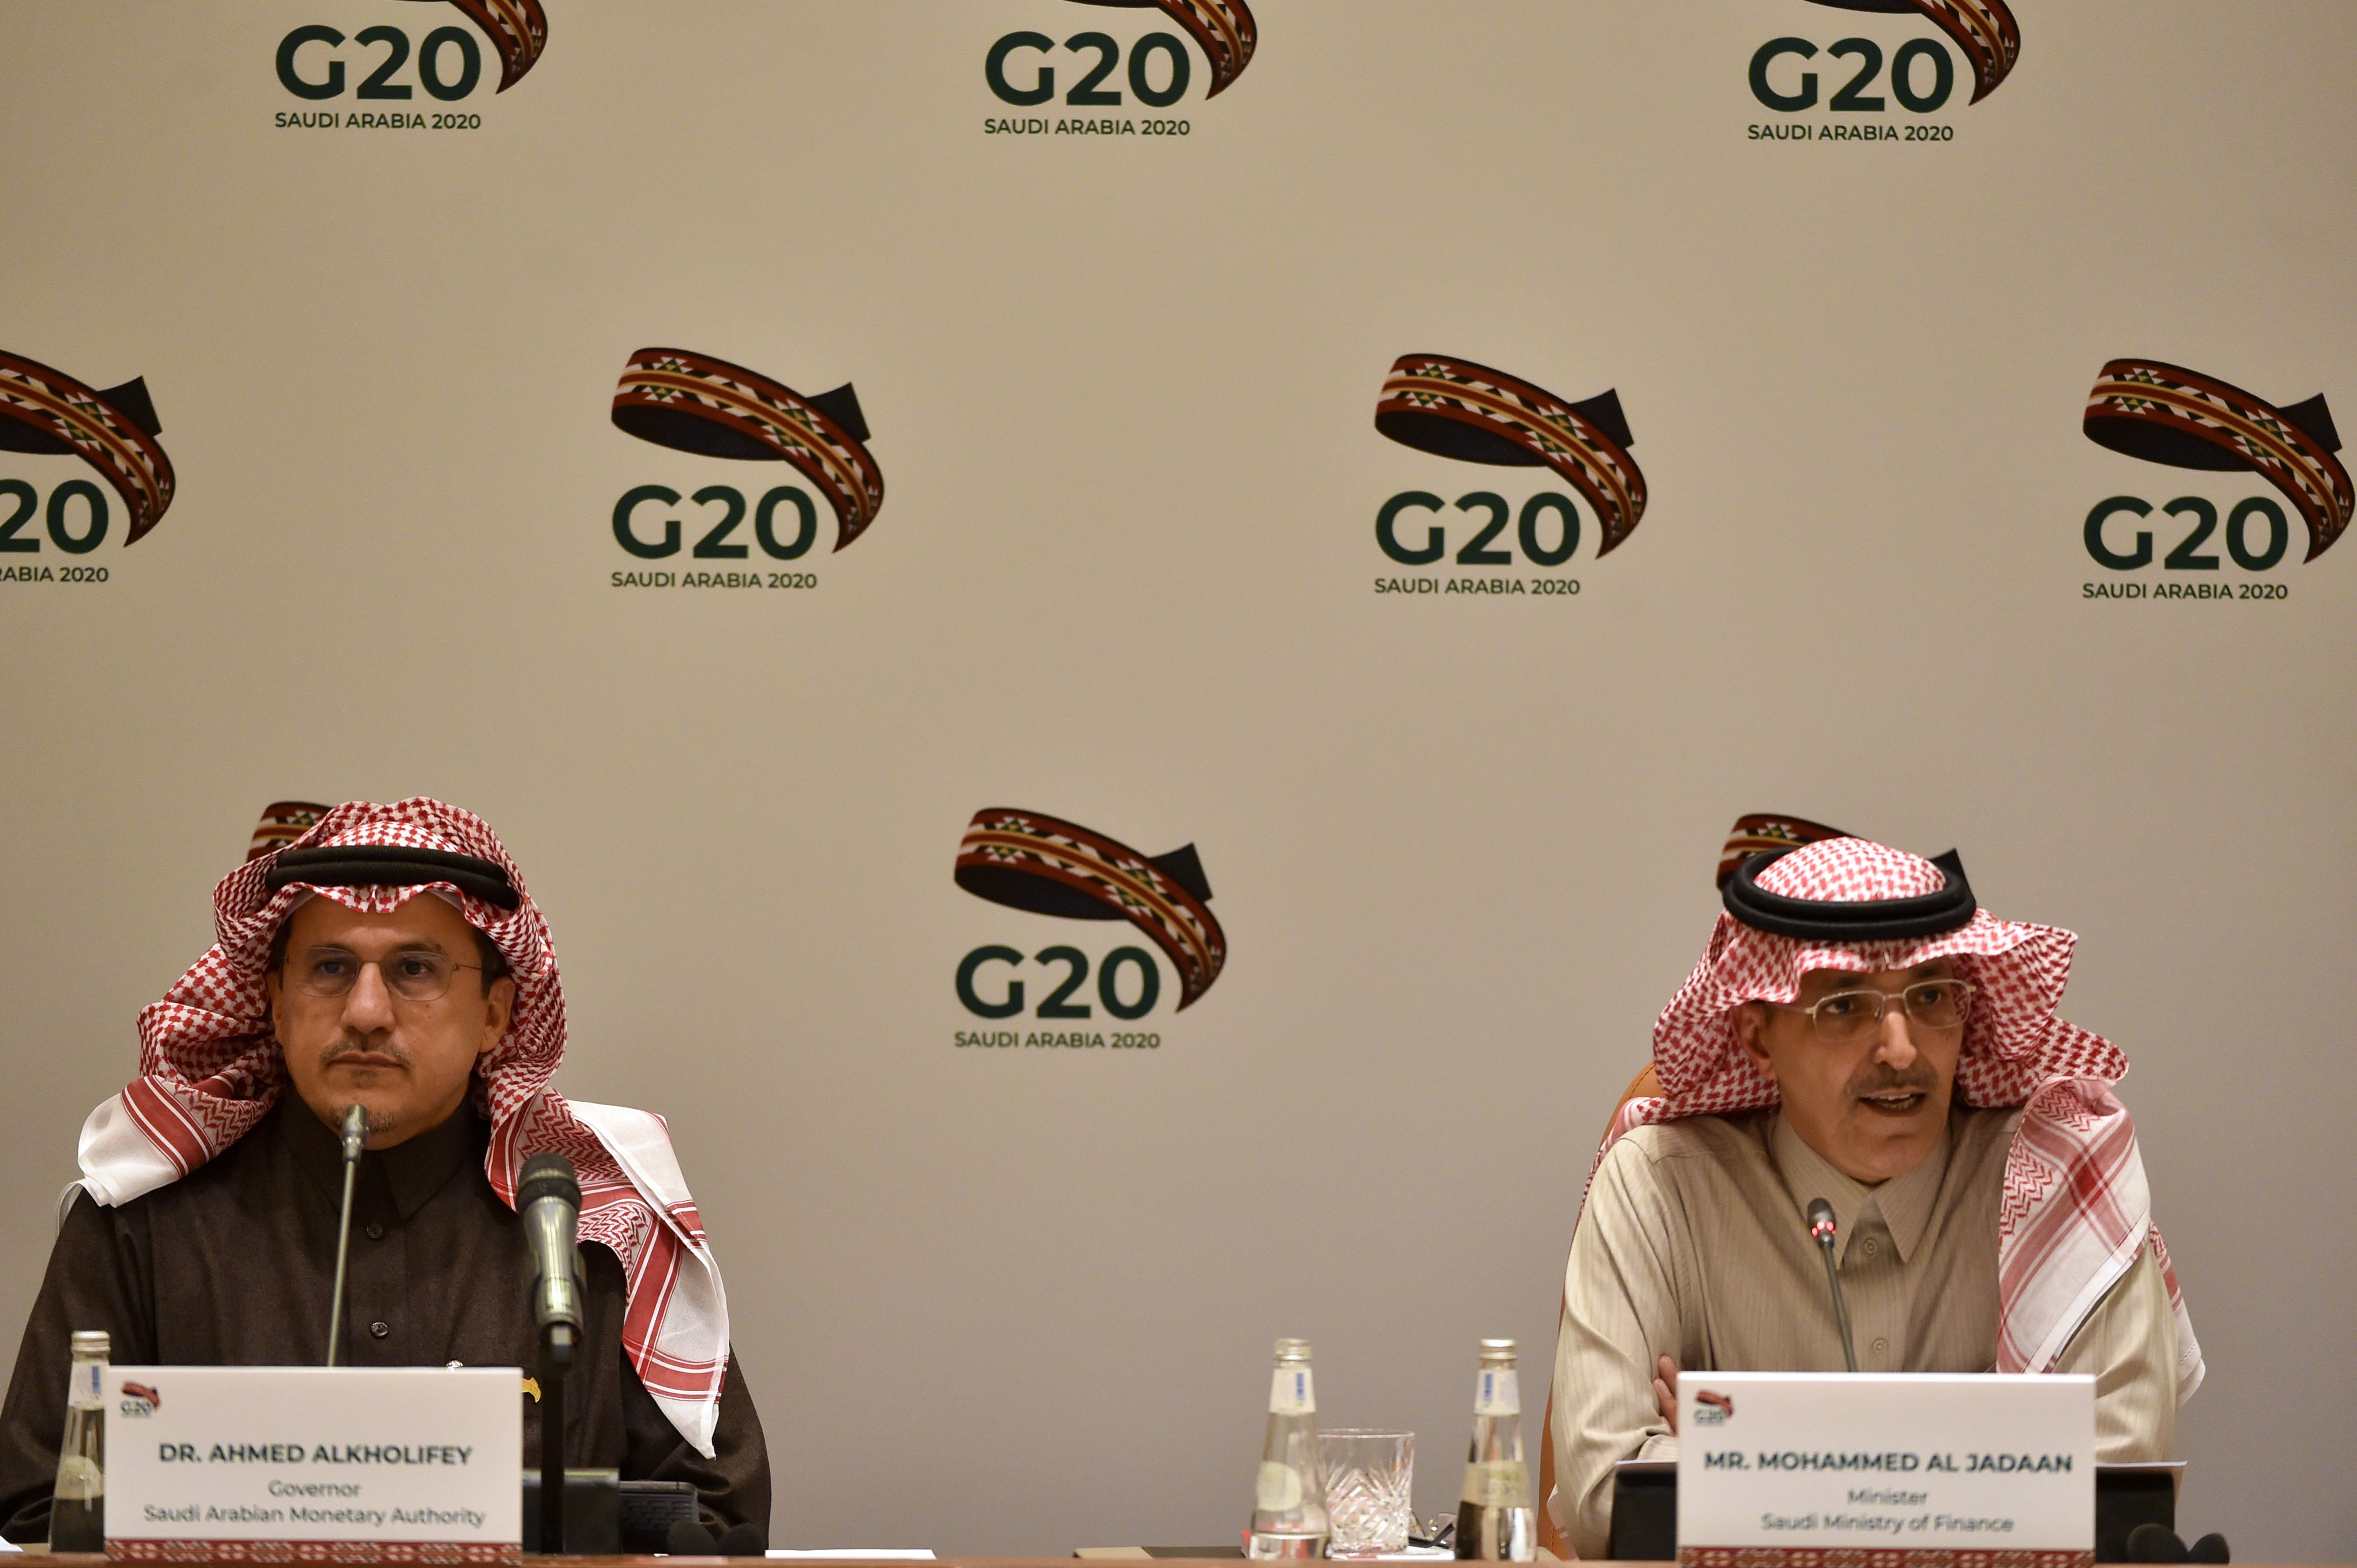 Saudi Minister of Finance Mohammed Al-Jadaan (L) and Ahmed Alkholifey, Governor of the Saudi Arabian Monetary Authority, Central Bank of Saudi Arabia, attend a meeting of Finance ministers and central bank governors of the G20 nations in the Saudi capital Riyadh on February 23, 2020. - The deadly coronavirus epidemic will dent global growth, the IMF warned, as G20 finance ministers and central bank governors weighed its economic ripple effects at a two-day gathering in Riyadh. (Photo by FAYEZ NURELDINE / AFP)